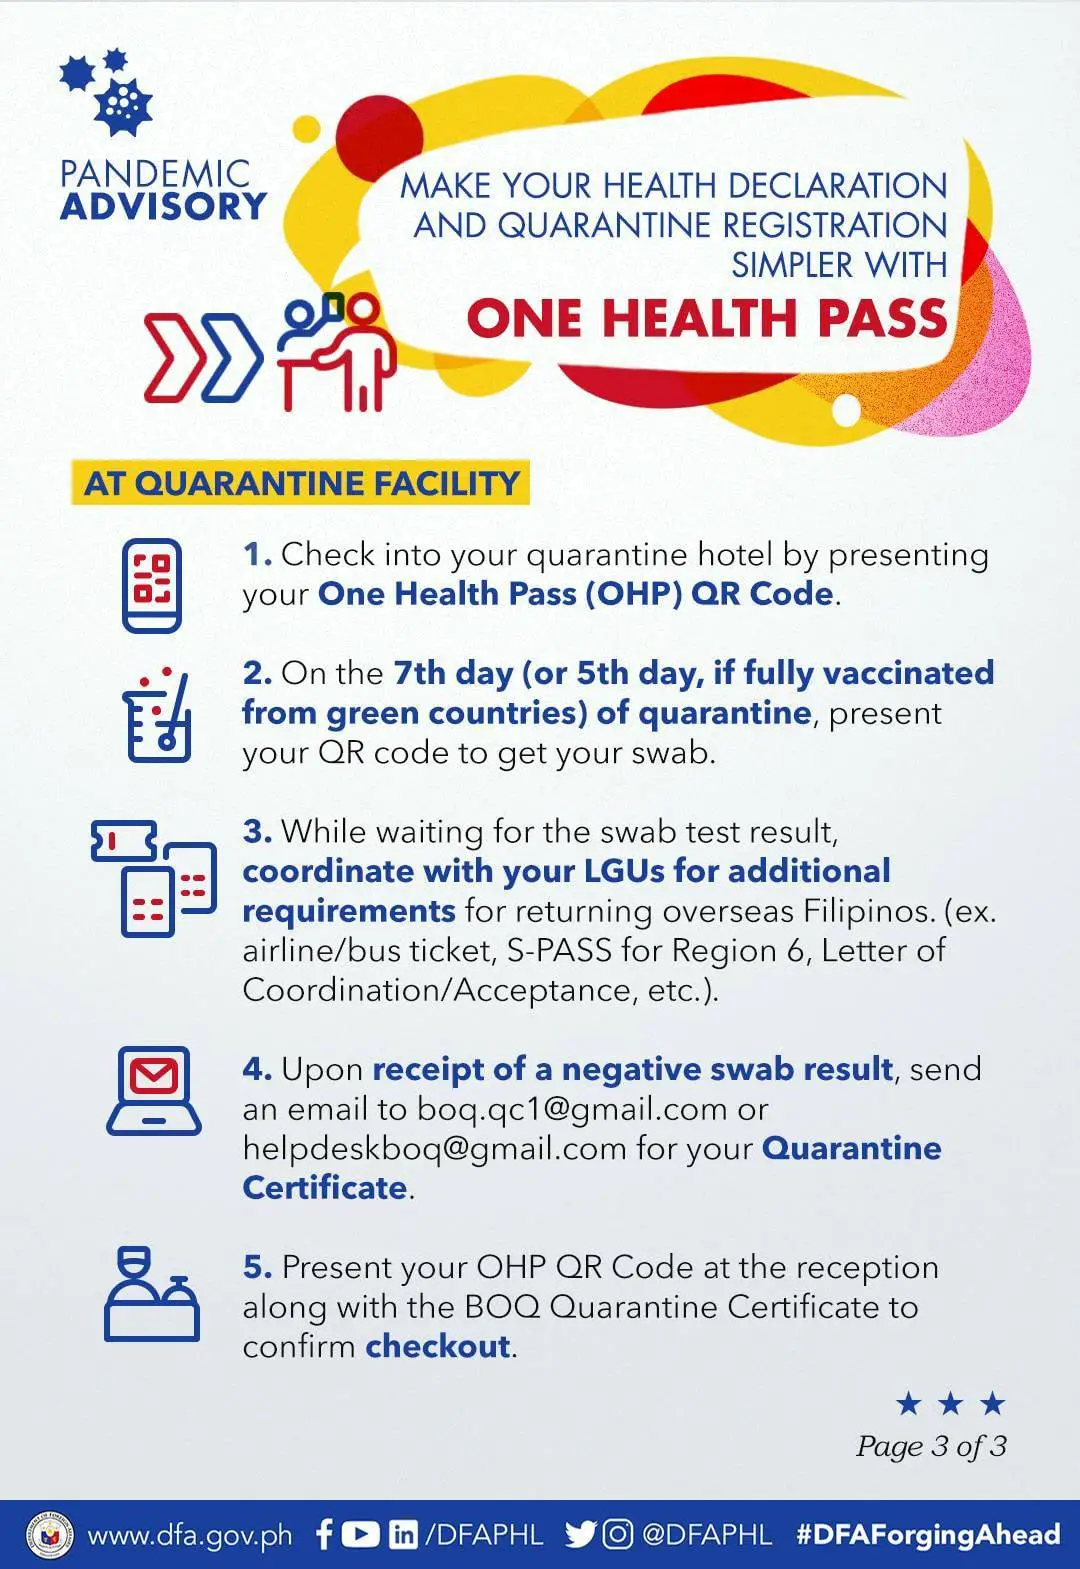 How To Register in One Health Pass